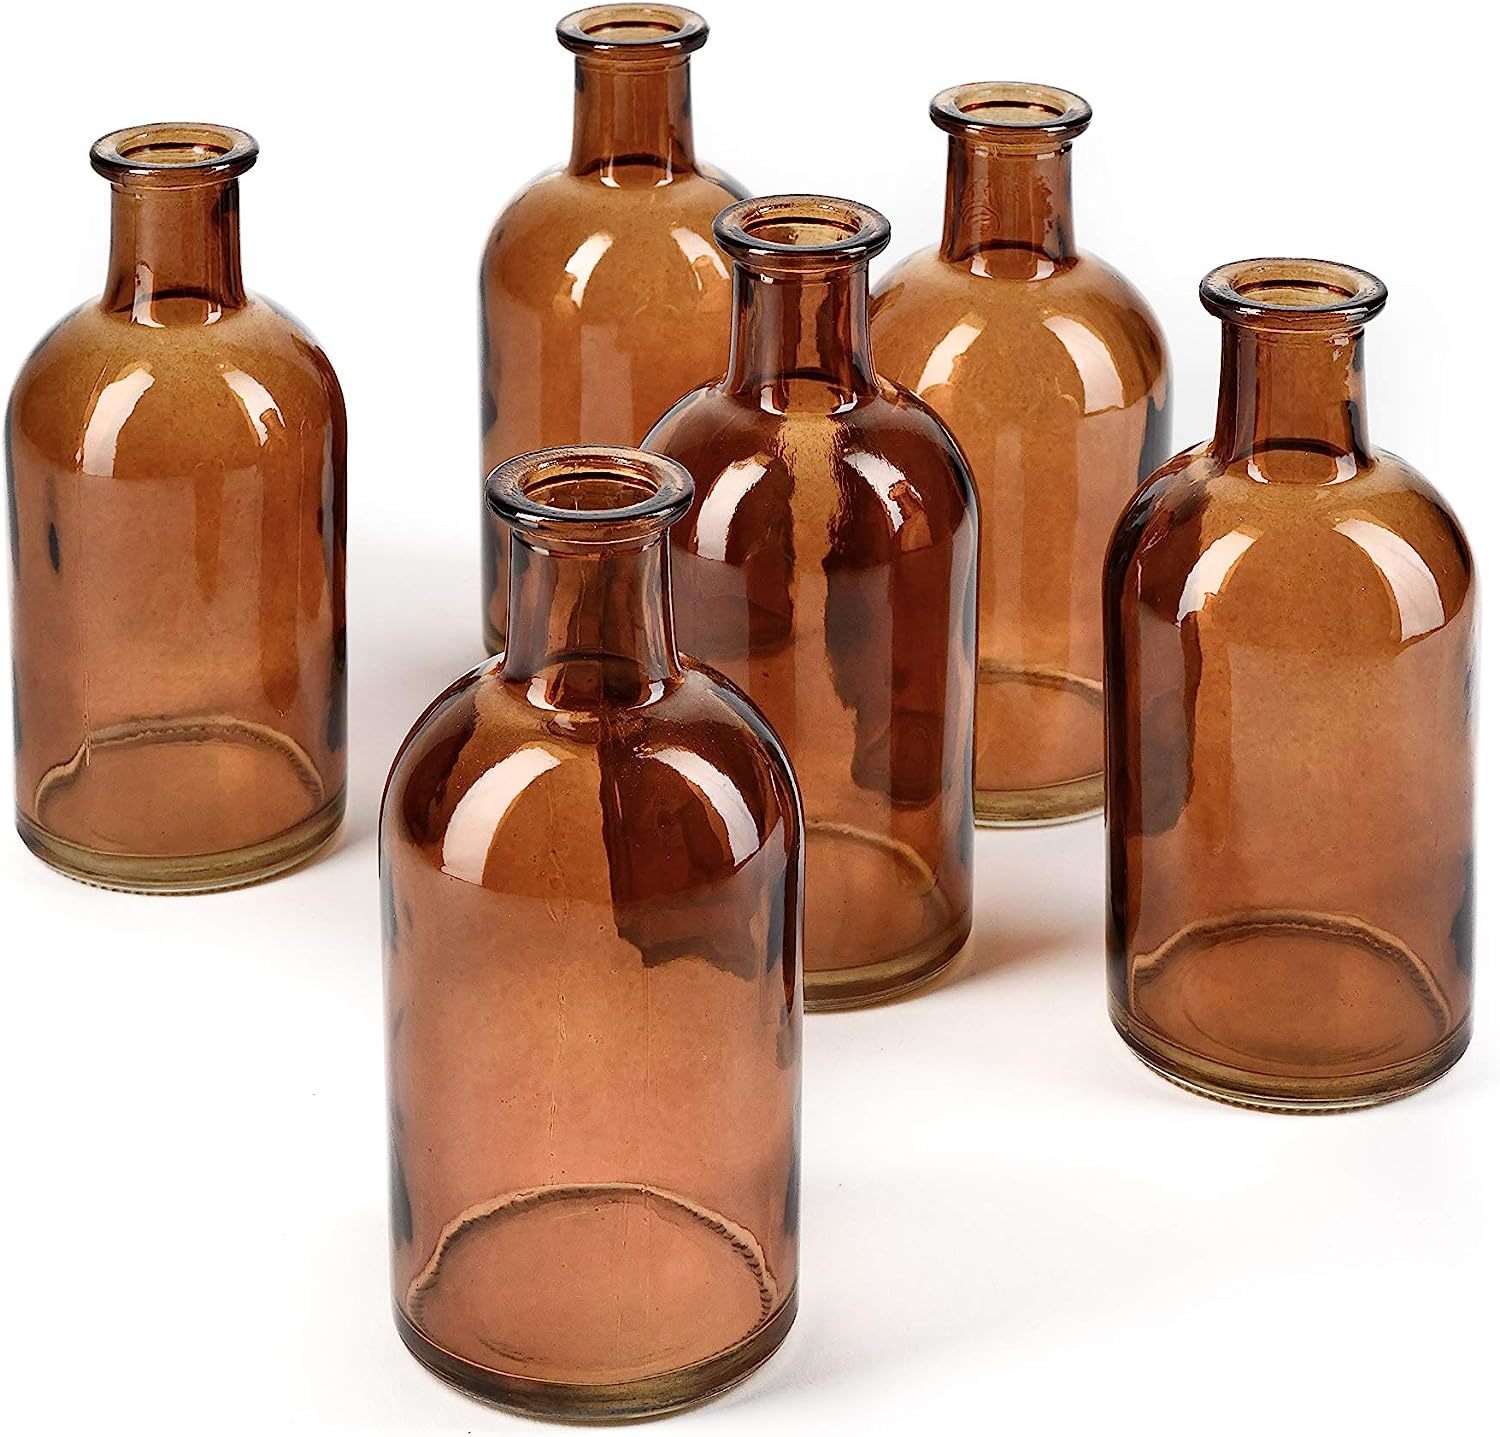 Primary image for Living Bud Vases, Apothecary Jars, Decorative Glass Bottles, Wedding Reception